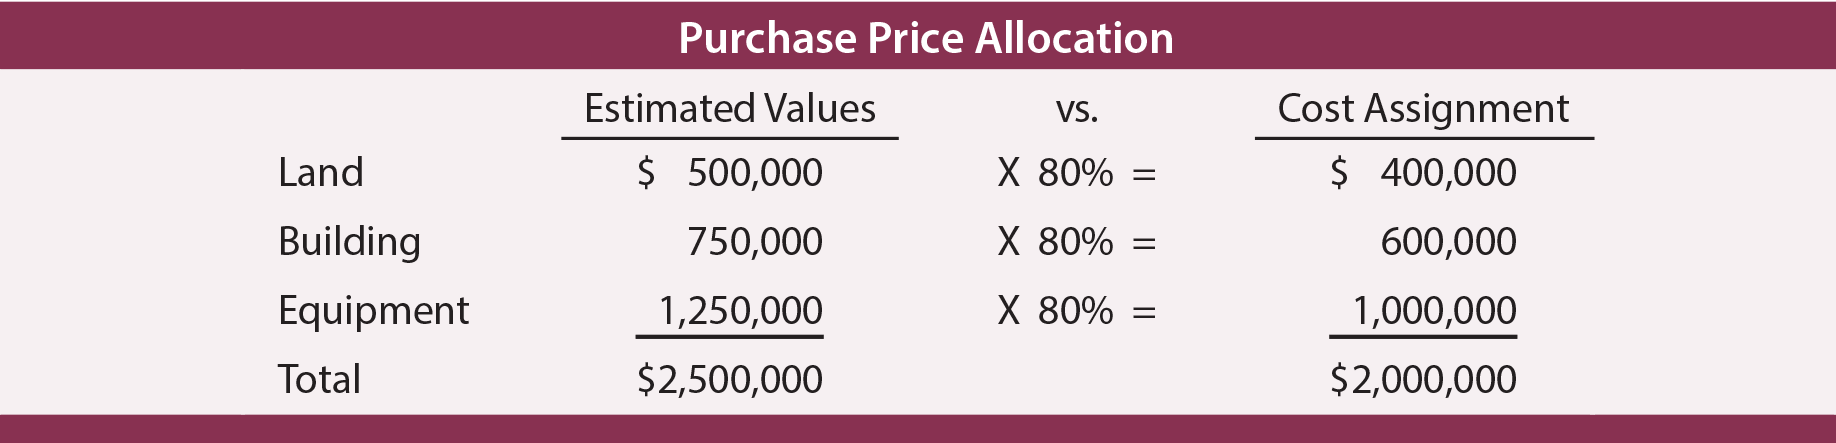 Purchase Price Allocation example